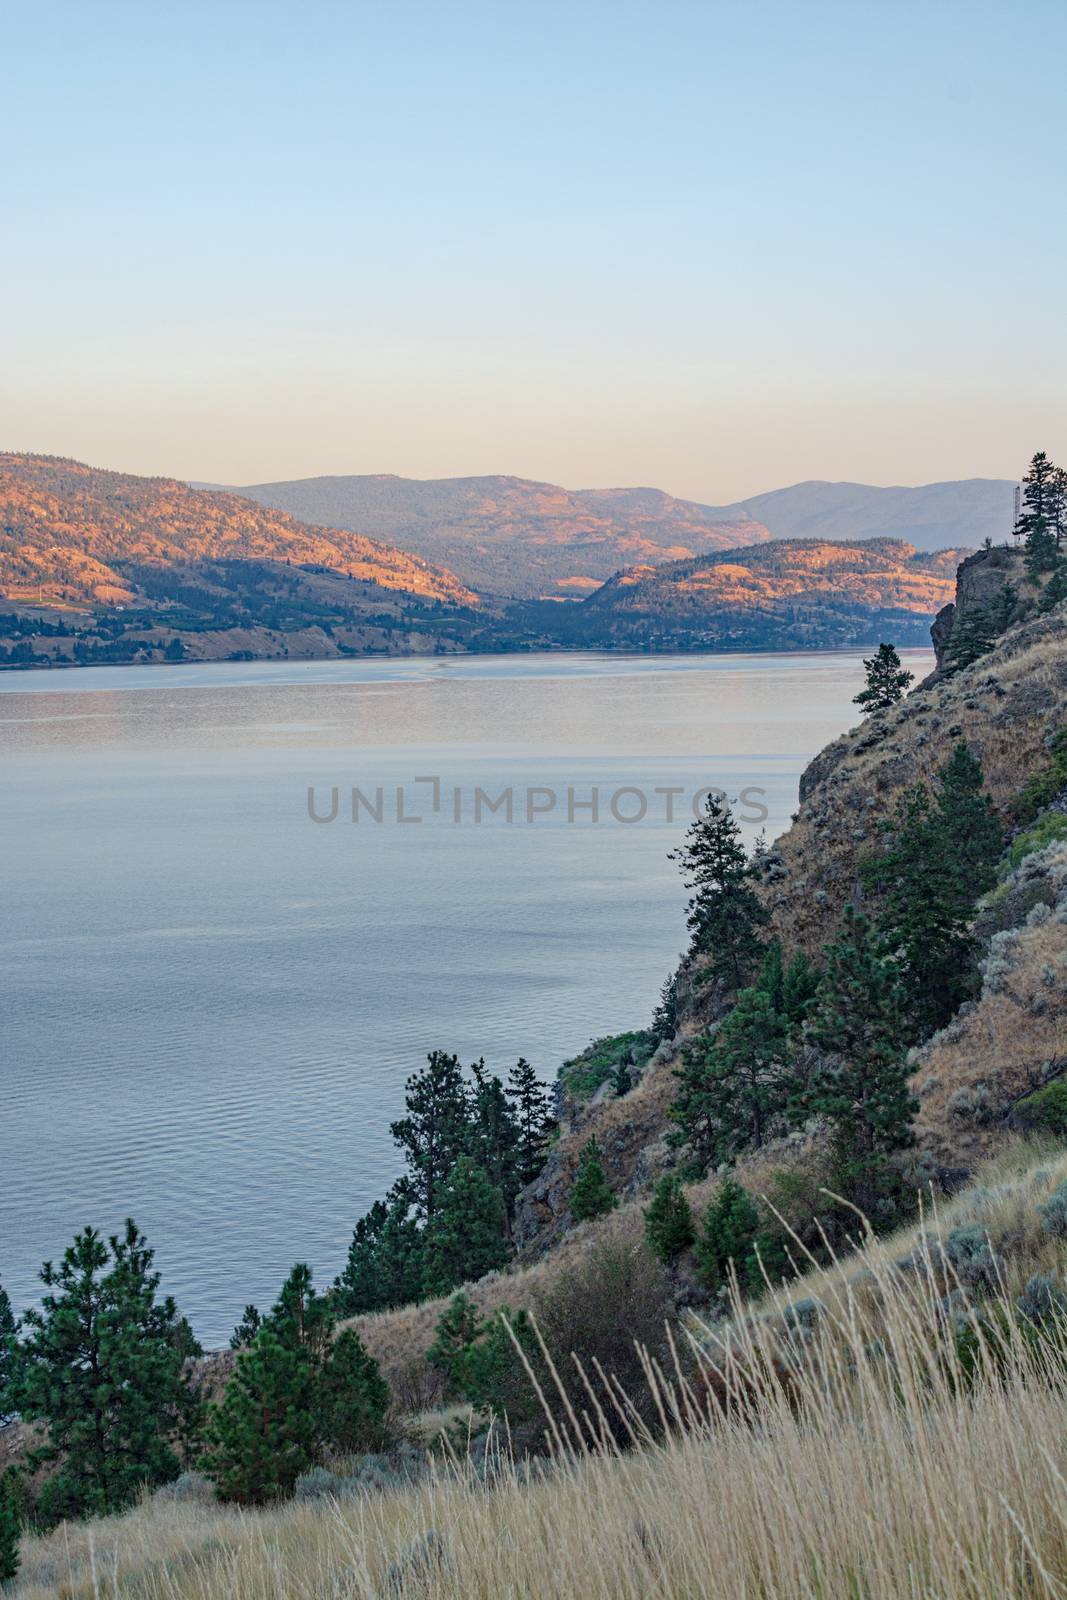 Scenery overview of Okanagan lake on summer sunset by Imagenet